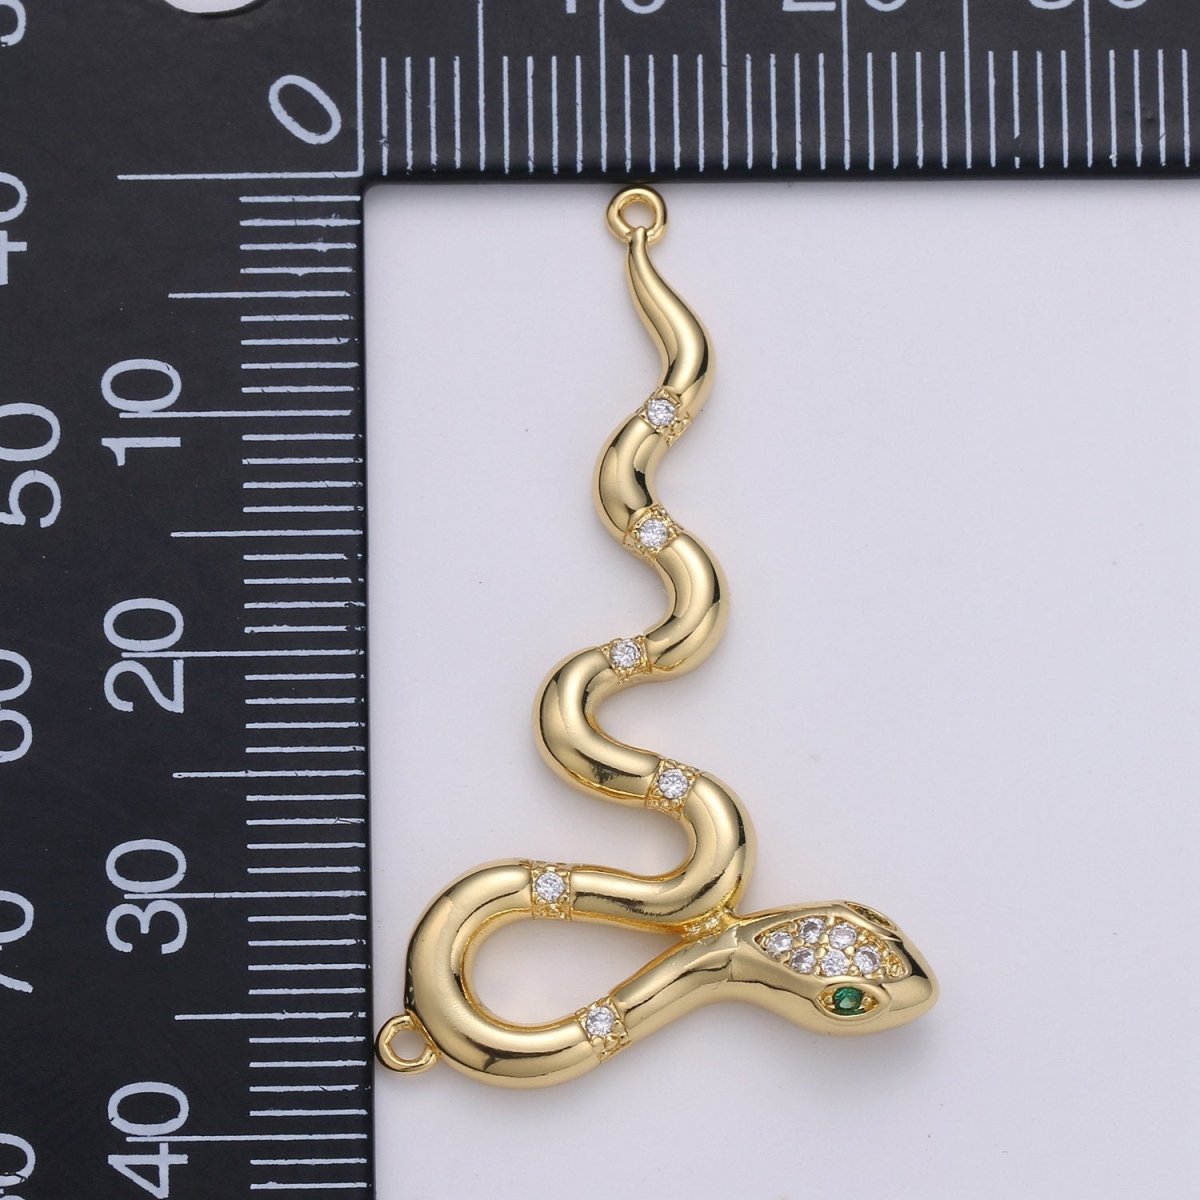 14k Gold Filled Snake Charm, Gold Snake Pendant Charm, Animal Jewelry Charm Double Bail Charm DIY Jewelry F-429 - DLUXCA